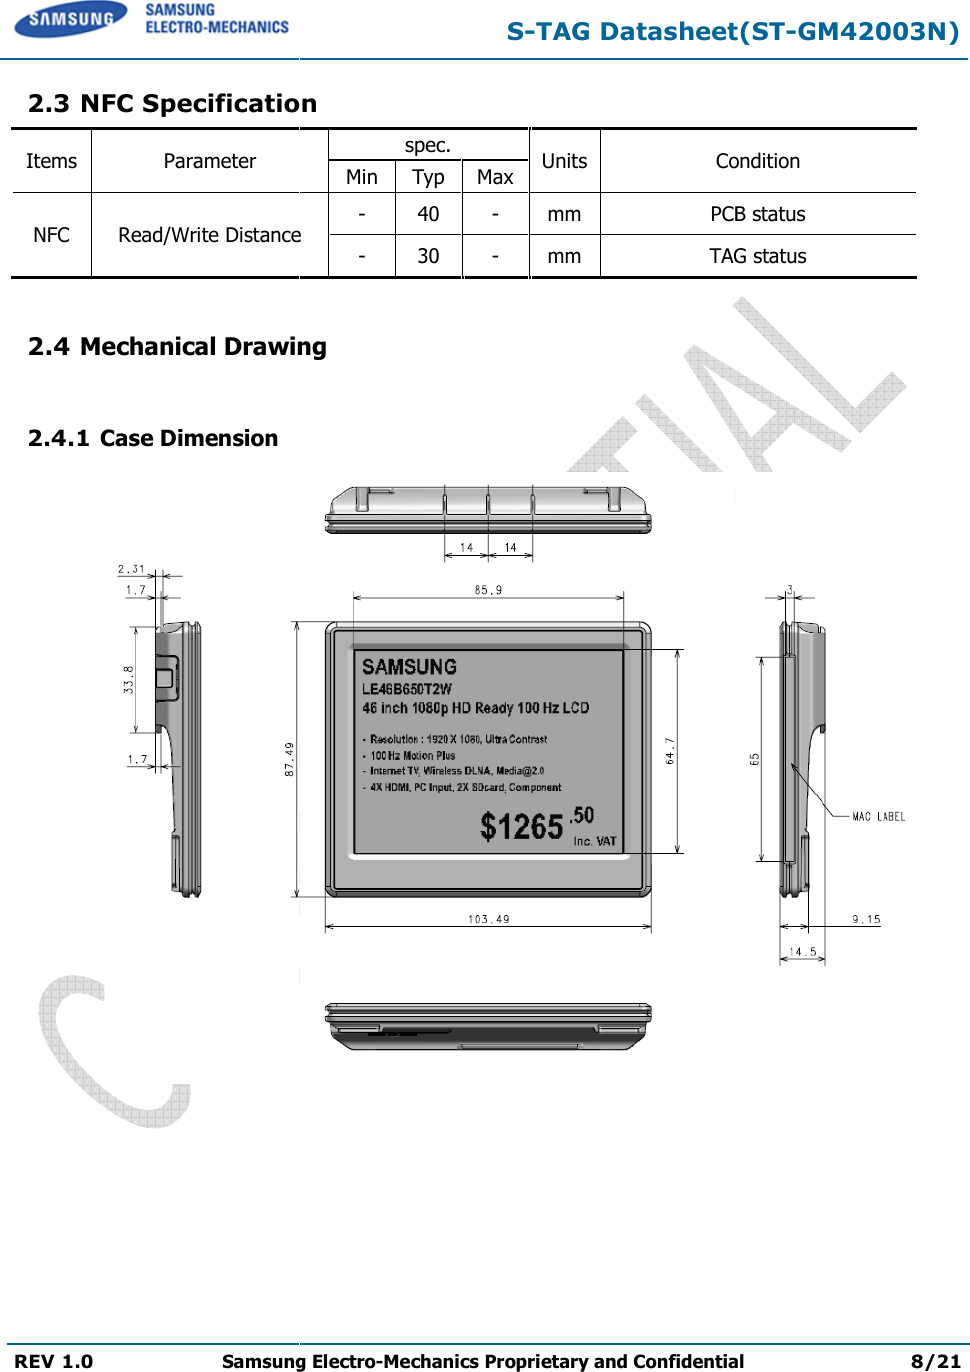   REV 1.0 Samsung Electro  2.3 NFC SpecificationItems Parameter NFC Read/Write Distance 2.4 Mechanical Drawing 2.4.1 Case Dimension  S-TAG Datasheet(STSamsung Electro-Mechanics Proprietary and ConfidentialNFC Specification spec.  Units ConditionMin Typ Max Read/Write Distance -  40  -  mm PCB status-  30  -  mm TAGnical Drawing TAG Datasheet(ST-GM42003N) Proprietary and Confidential 8/21 Condition PCB status TAG status  